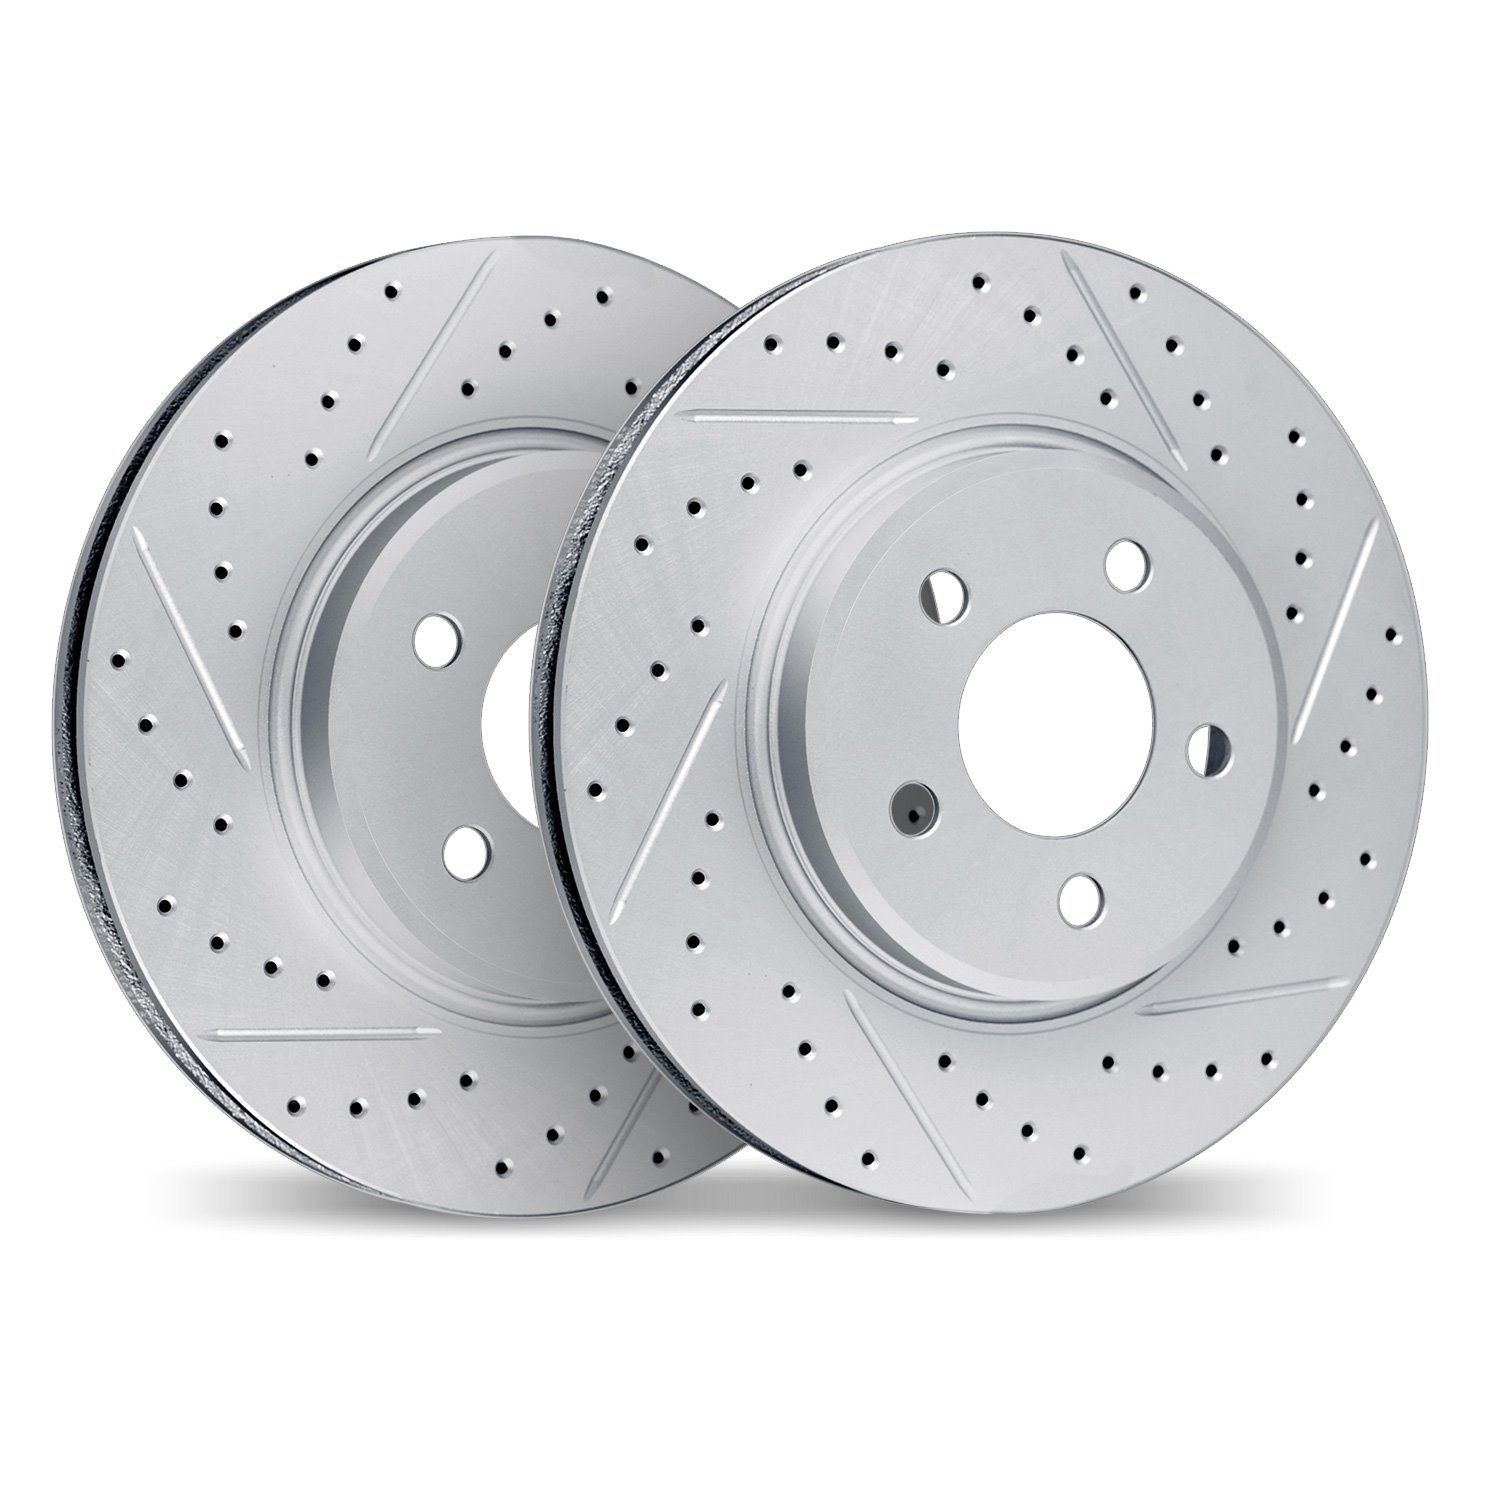 2002-76030 Geoperformance Drilled/Slotted Brake Rotors, 2004-2009 Lexus/Toyota/Scion, Position: Front